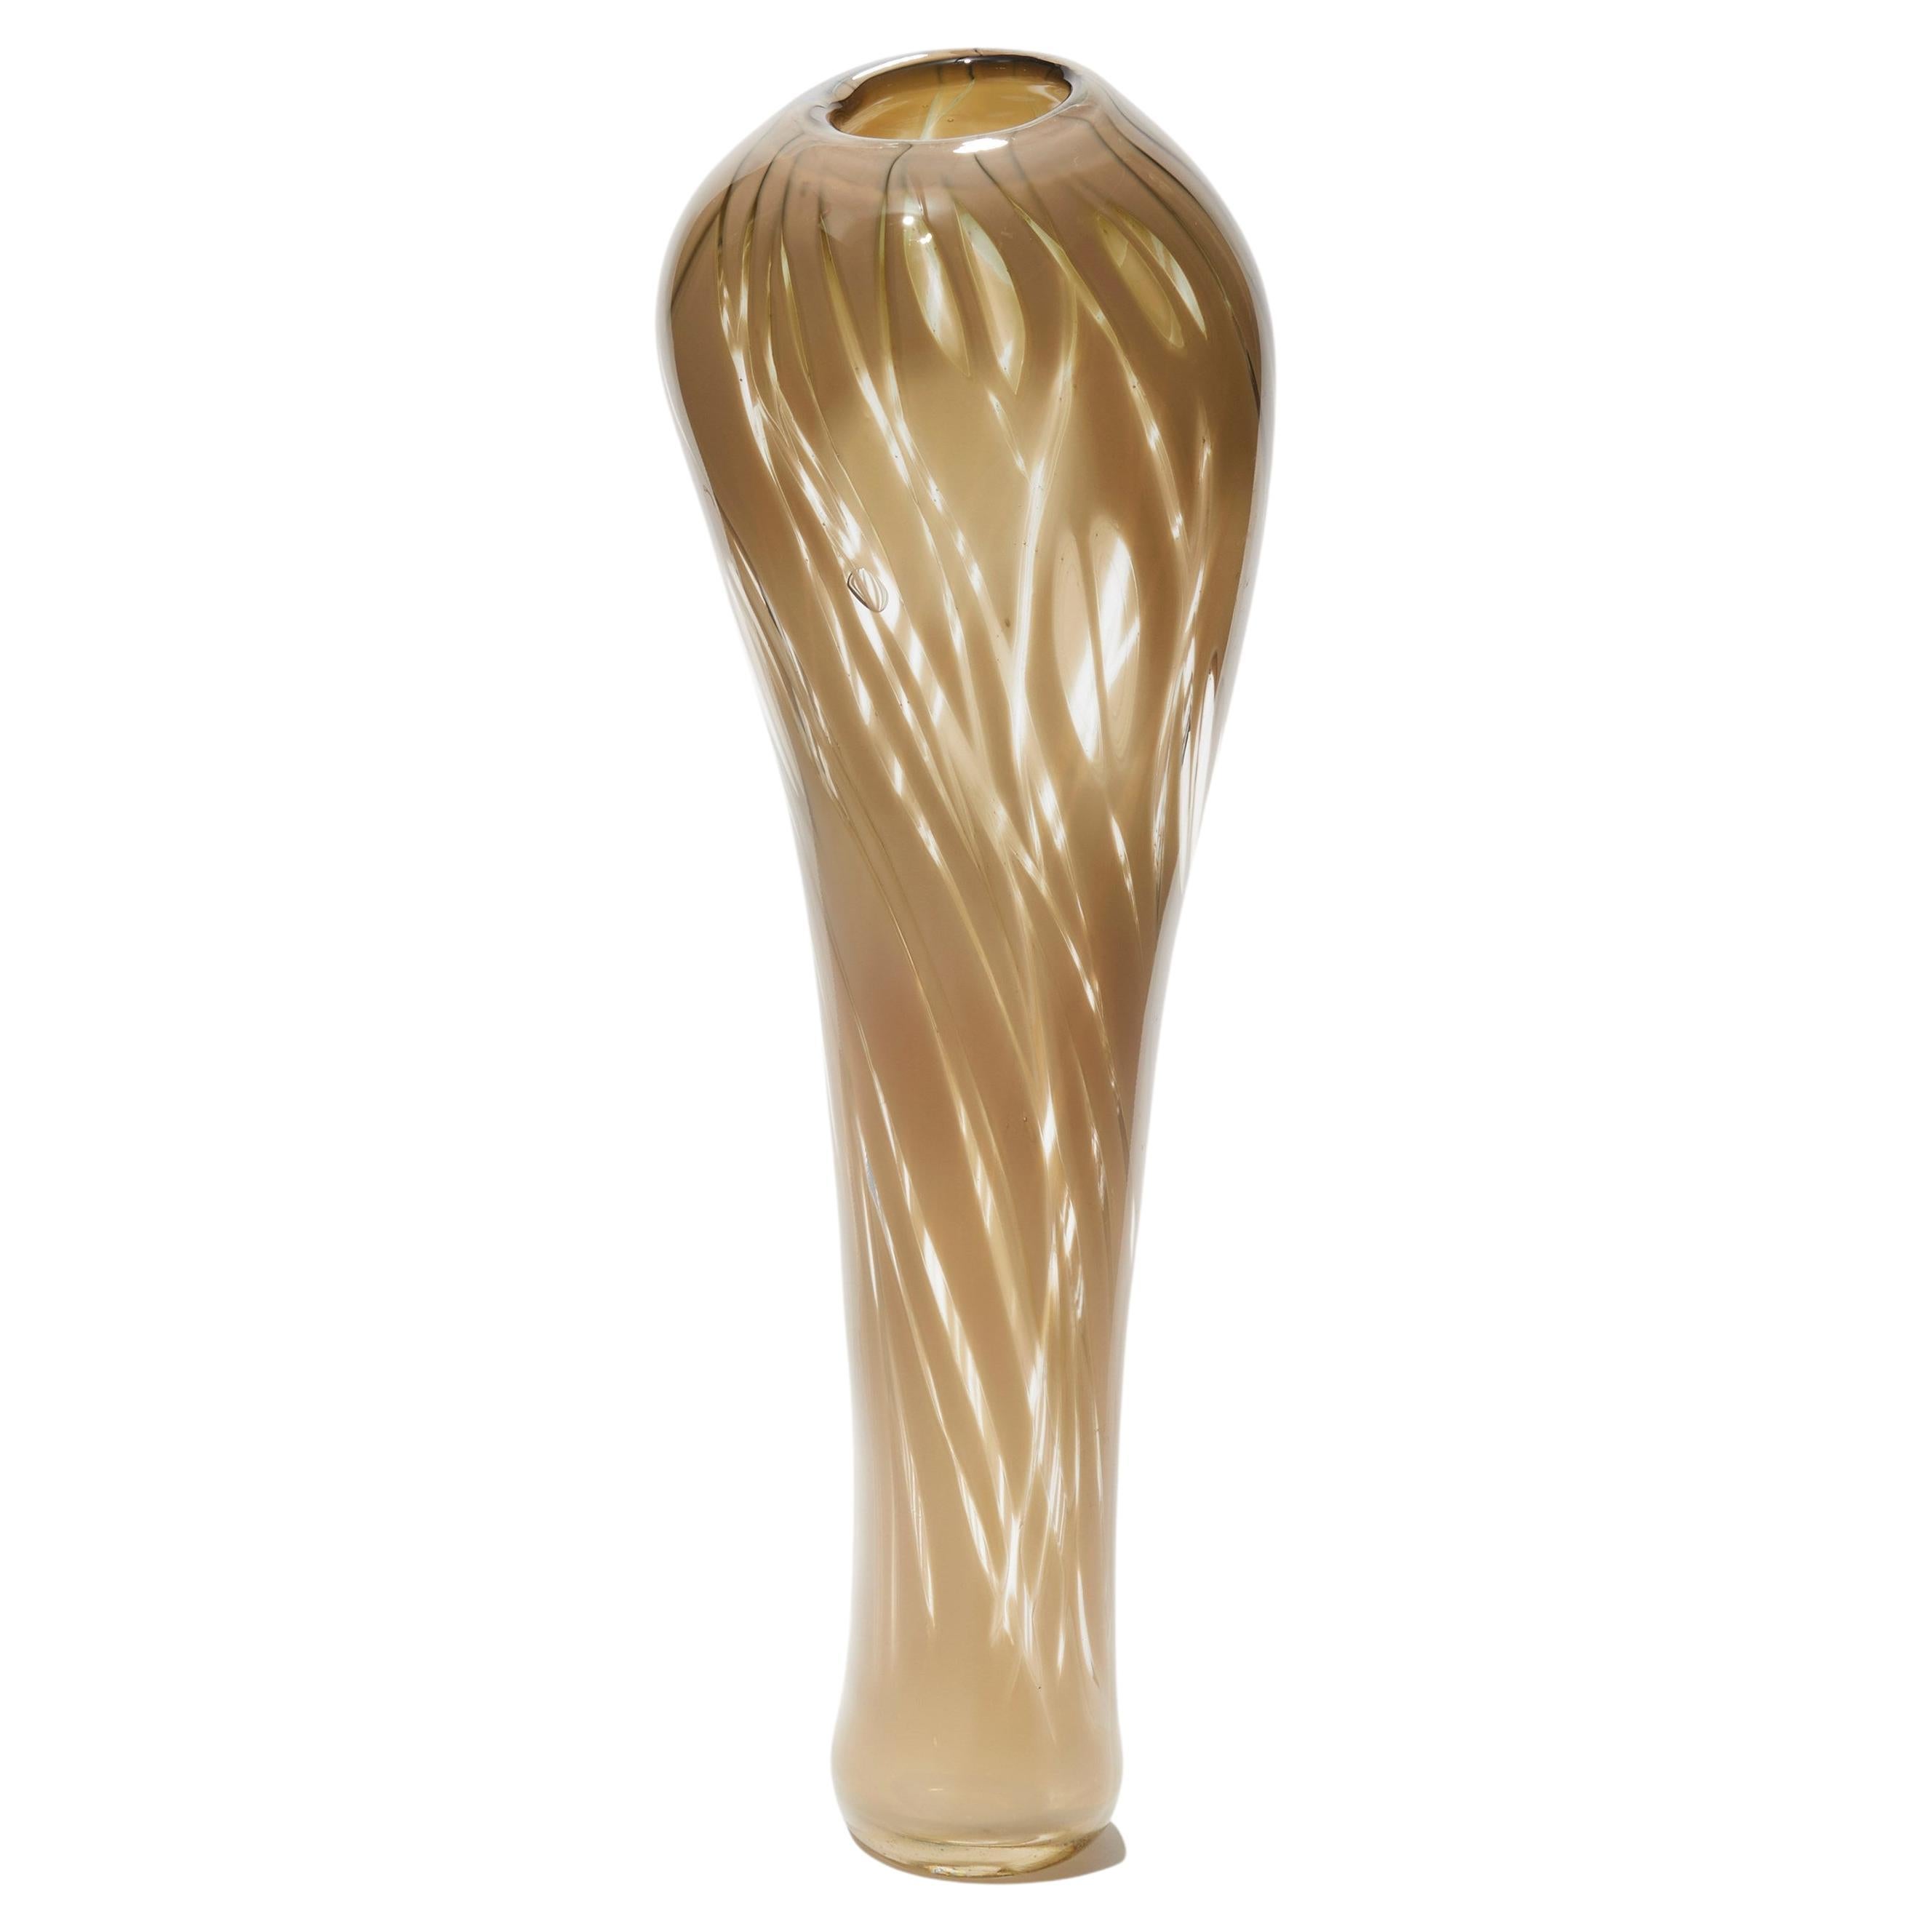 Cotinus I, a Fawn / Nude / Beige Sculptural Hand Blown Vase by Michèle Oberdieck For Sale